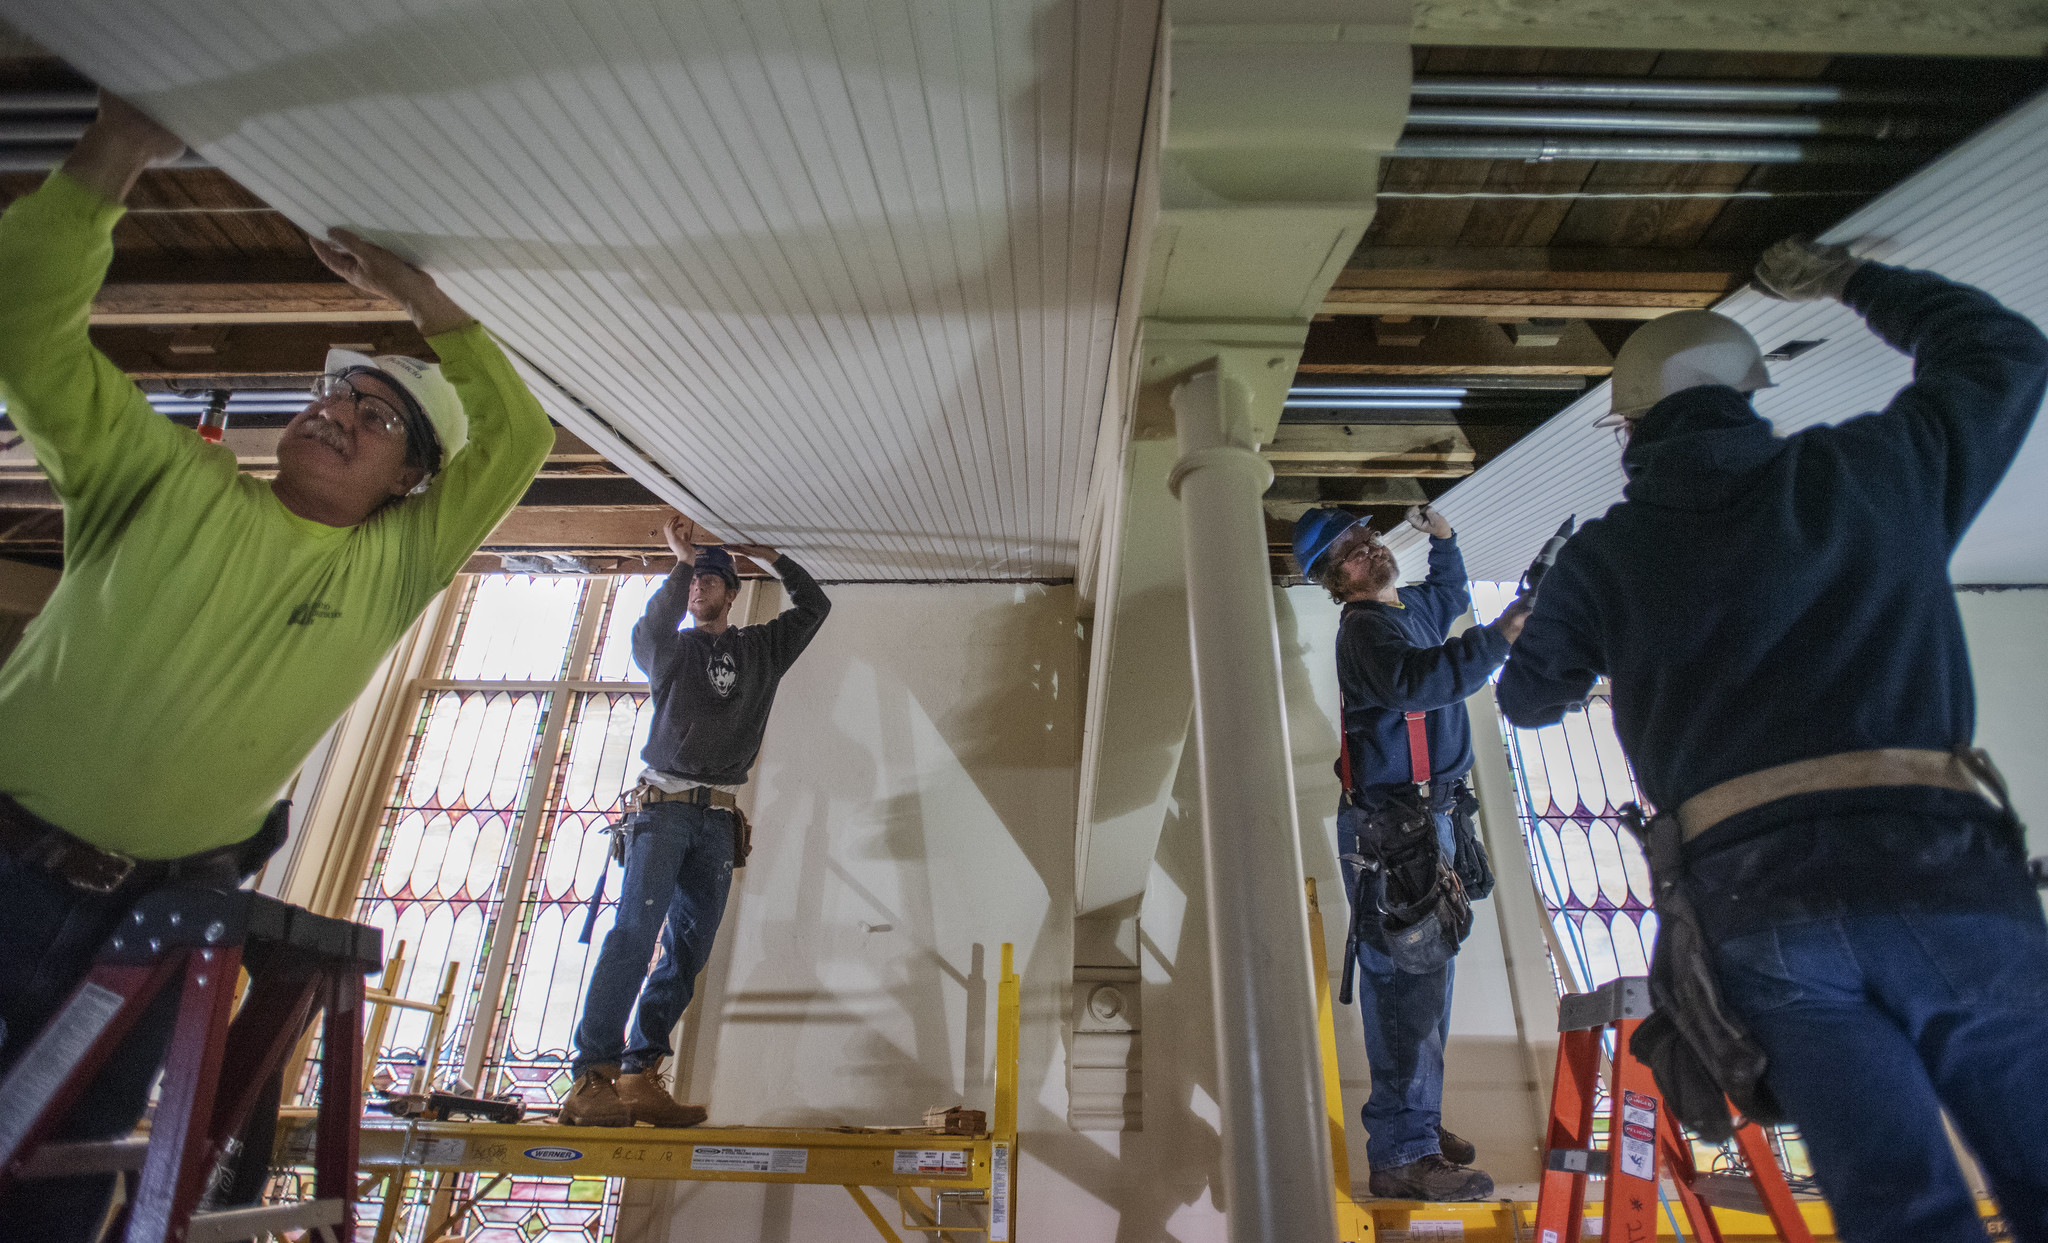 Construction workers attach wainscotting under the balcony during construction at UPH Monday, Novermber 11, 2019. A construction worker said it would take 300 miles of wainscotting to complete the project. Photo credit: Kate Penn - Proctors